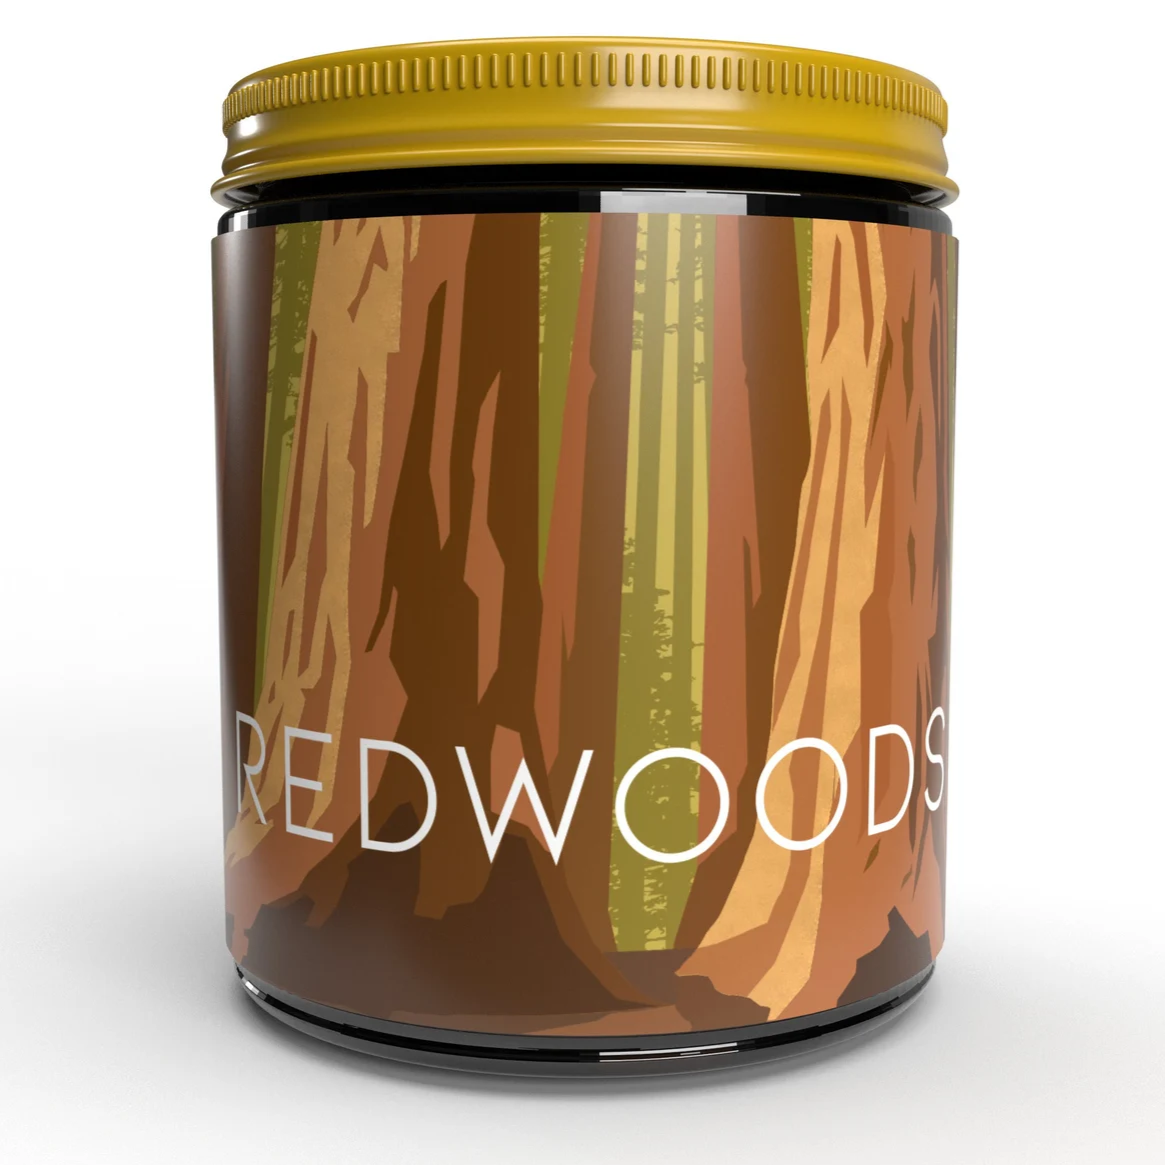 Redwood National Park Soy Wax Candle - 9oz